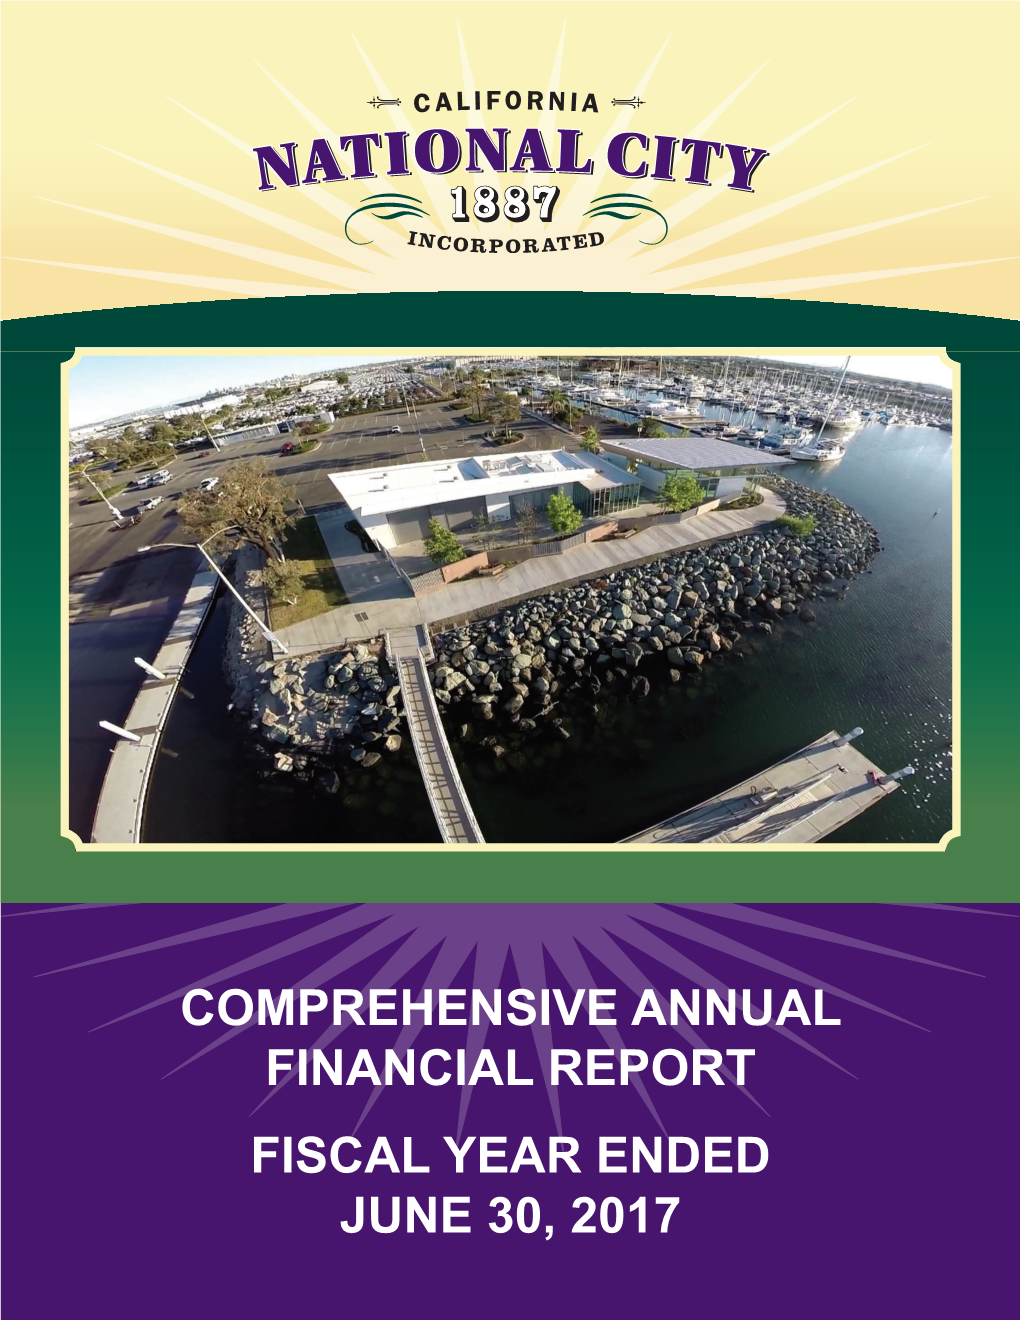 COMPREHENSIVE ANNUAL FINANCIAL REPORT FISCAL YEAR ENDED JUNE 30, 2017 Cover Photos: Aquatic Center and Marina, V